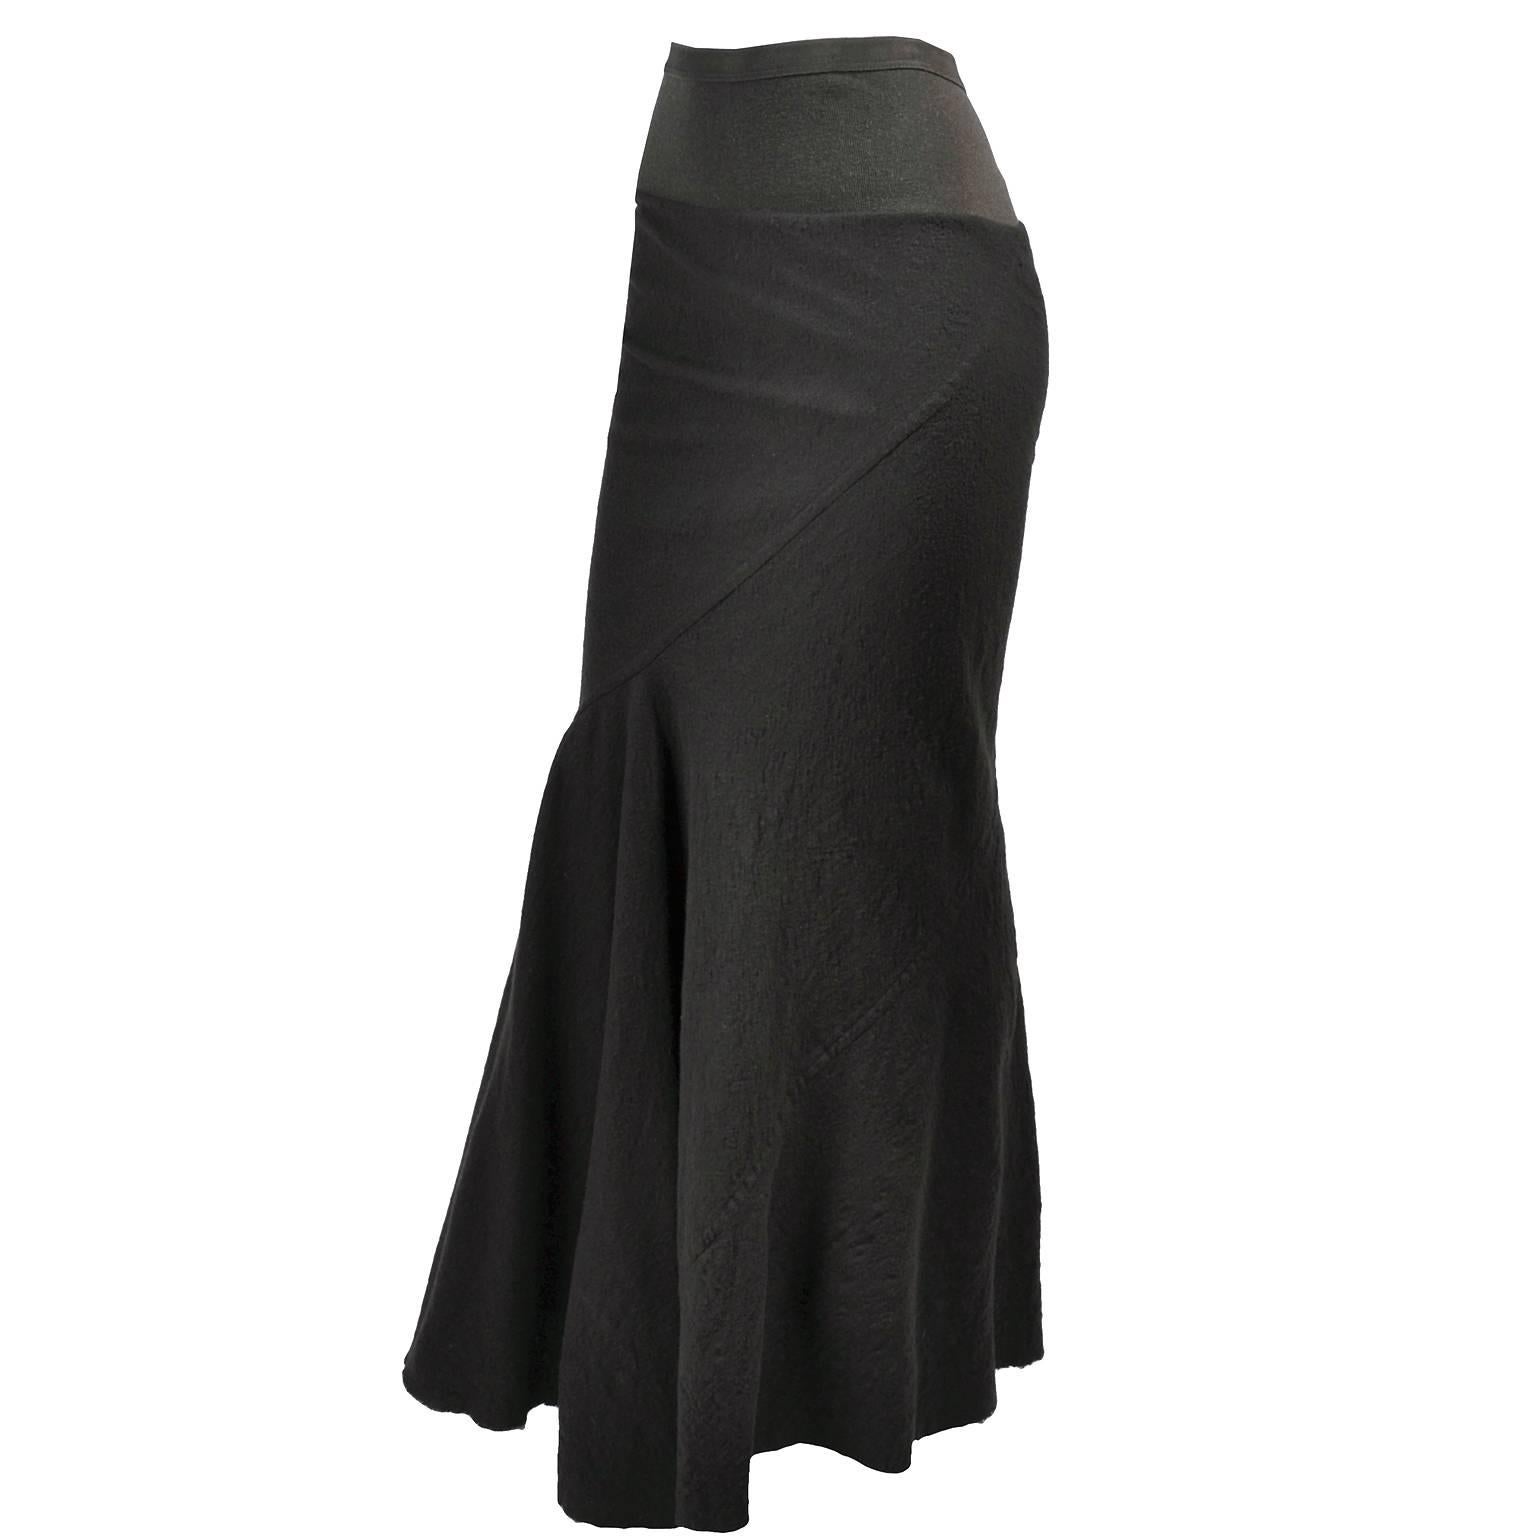 Rick Owens distressed maxi skirt from the Fall Winter 2006 Queen collection. This long dark green skirt is lined in a rayon/silk blend. This skirt has an avant garde look with asymmetrical seams across the skirt, a fishtail flair at the end of the